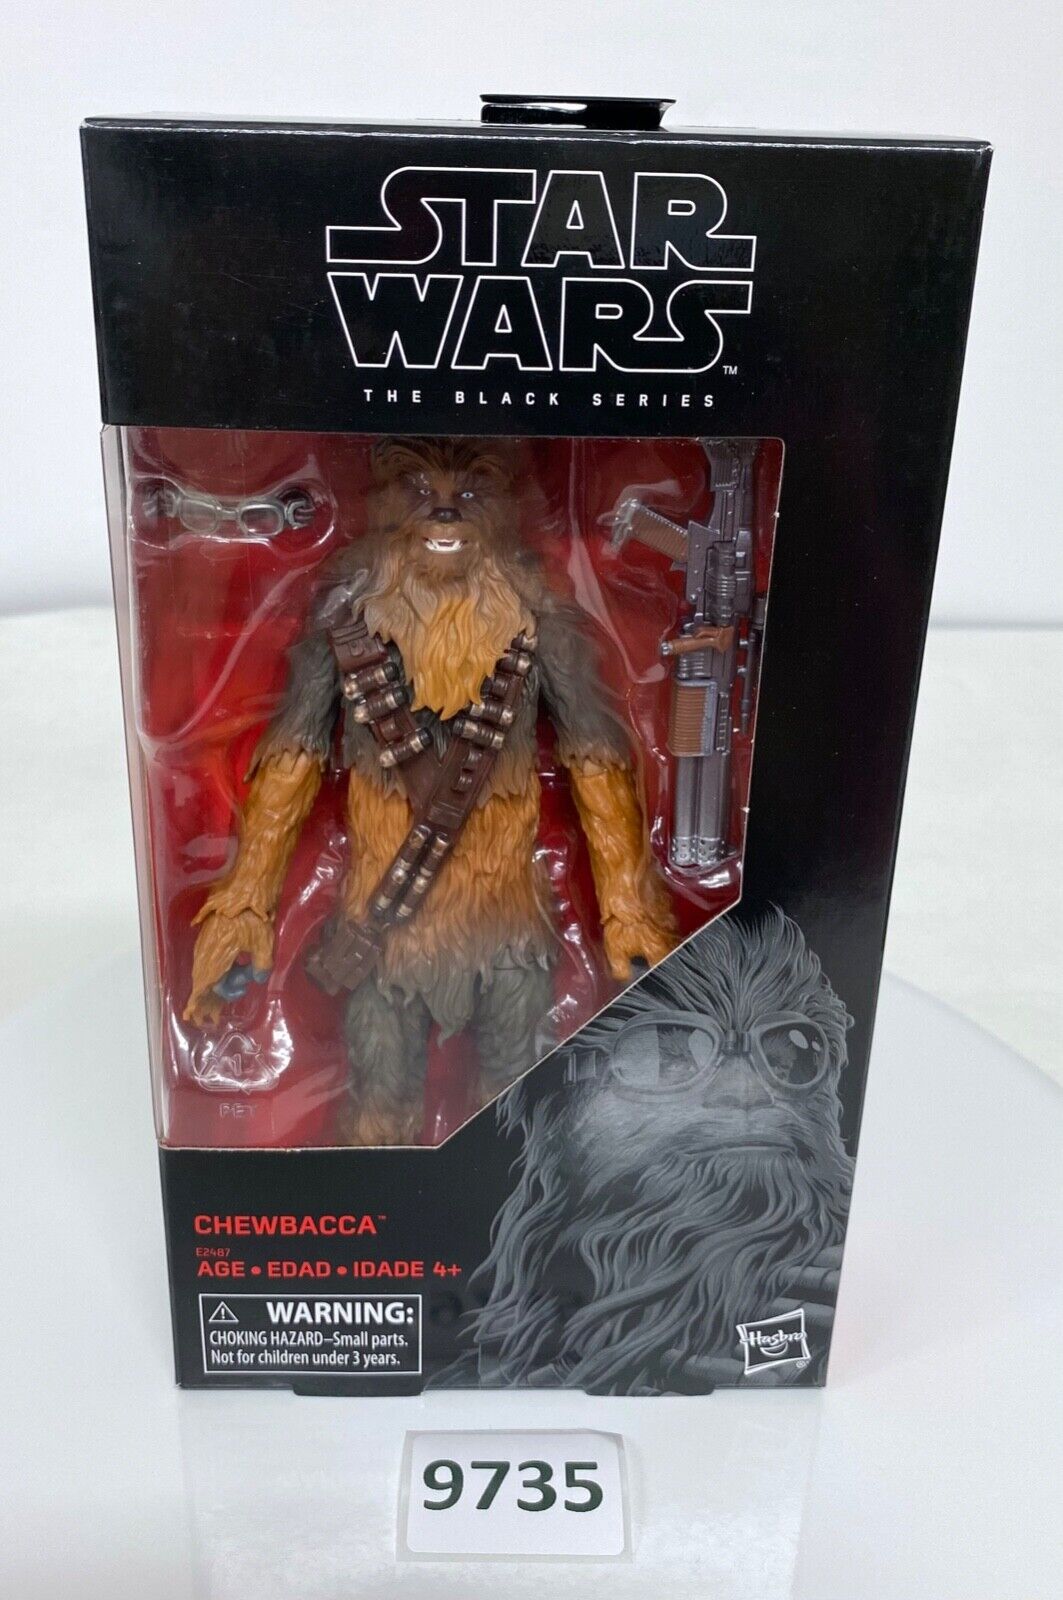 Star Wars The Black Series 6" inch CHEWBACCA w/ Goggles Target Exclusive